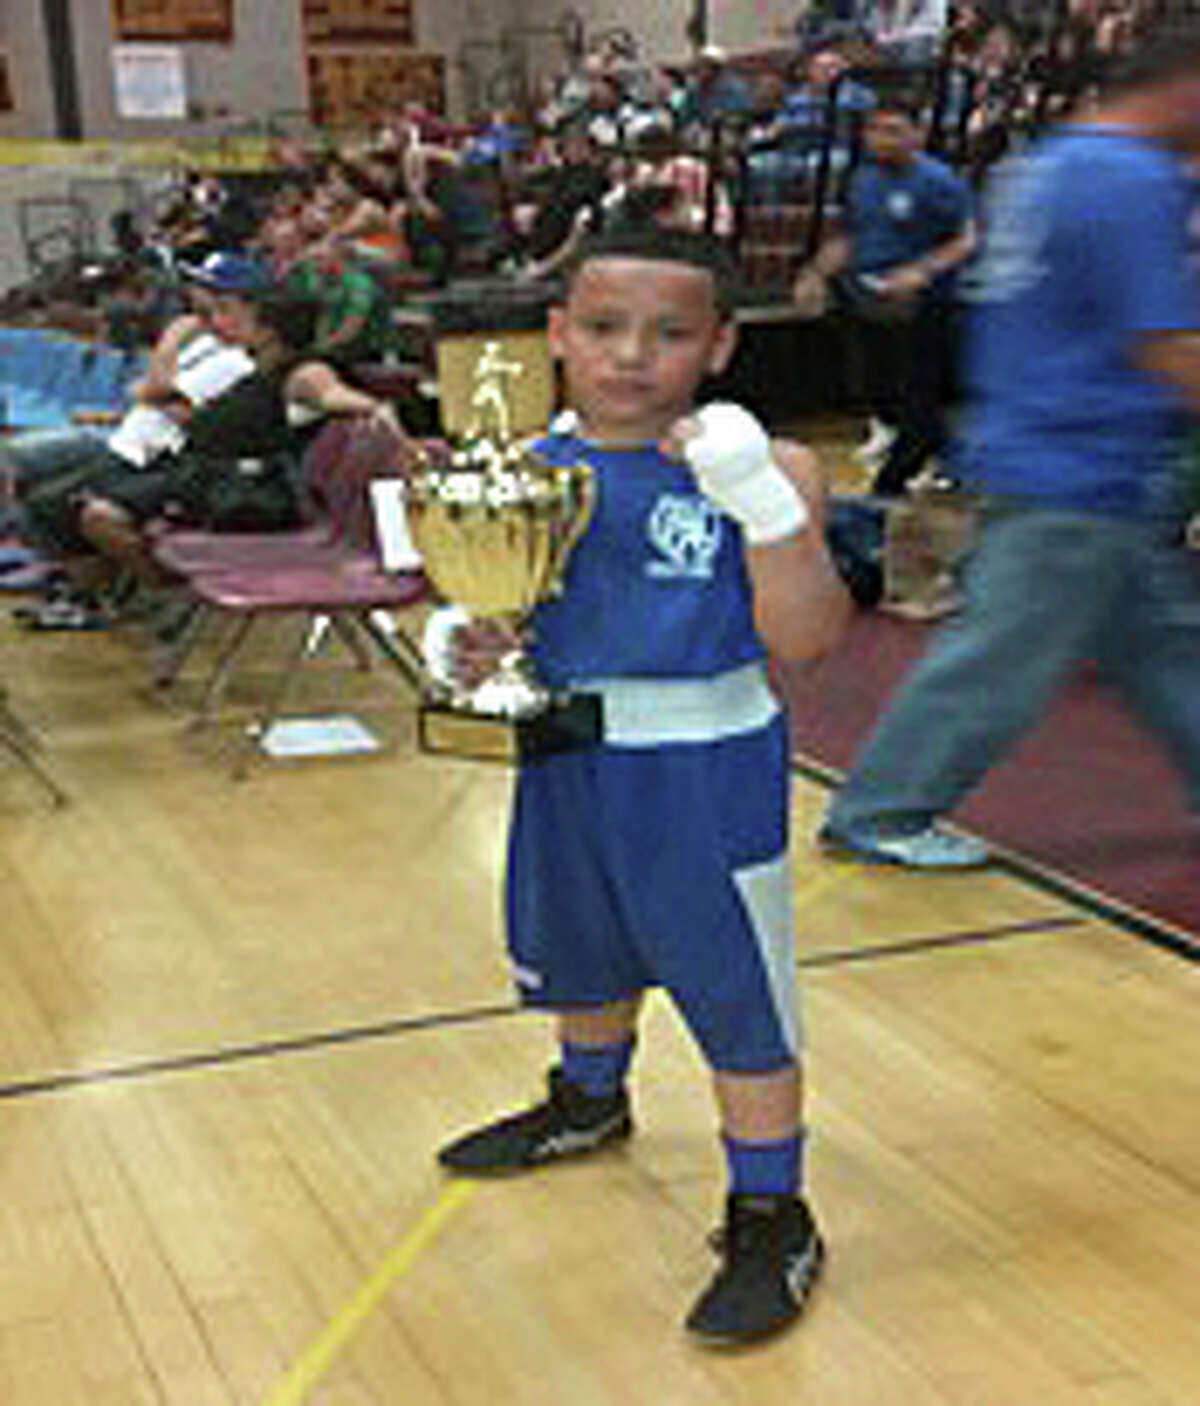 Joseph Chisholm, age 10, who will be competing in the 75 and 80 pound divisions in the 2016 USA Boxing Junior Olympic National Championships in Dallas. Joseph is currently the Connecticut Silver Glove and the Connecticut Junior Olympic champion in both weight classes.